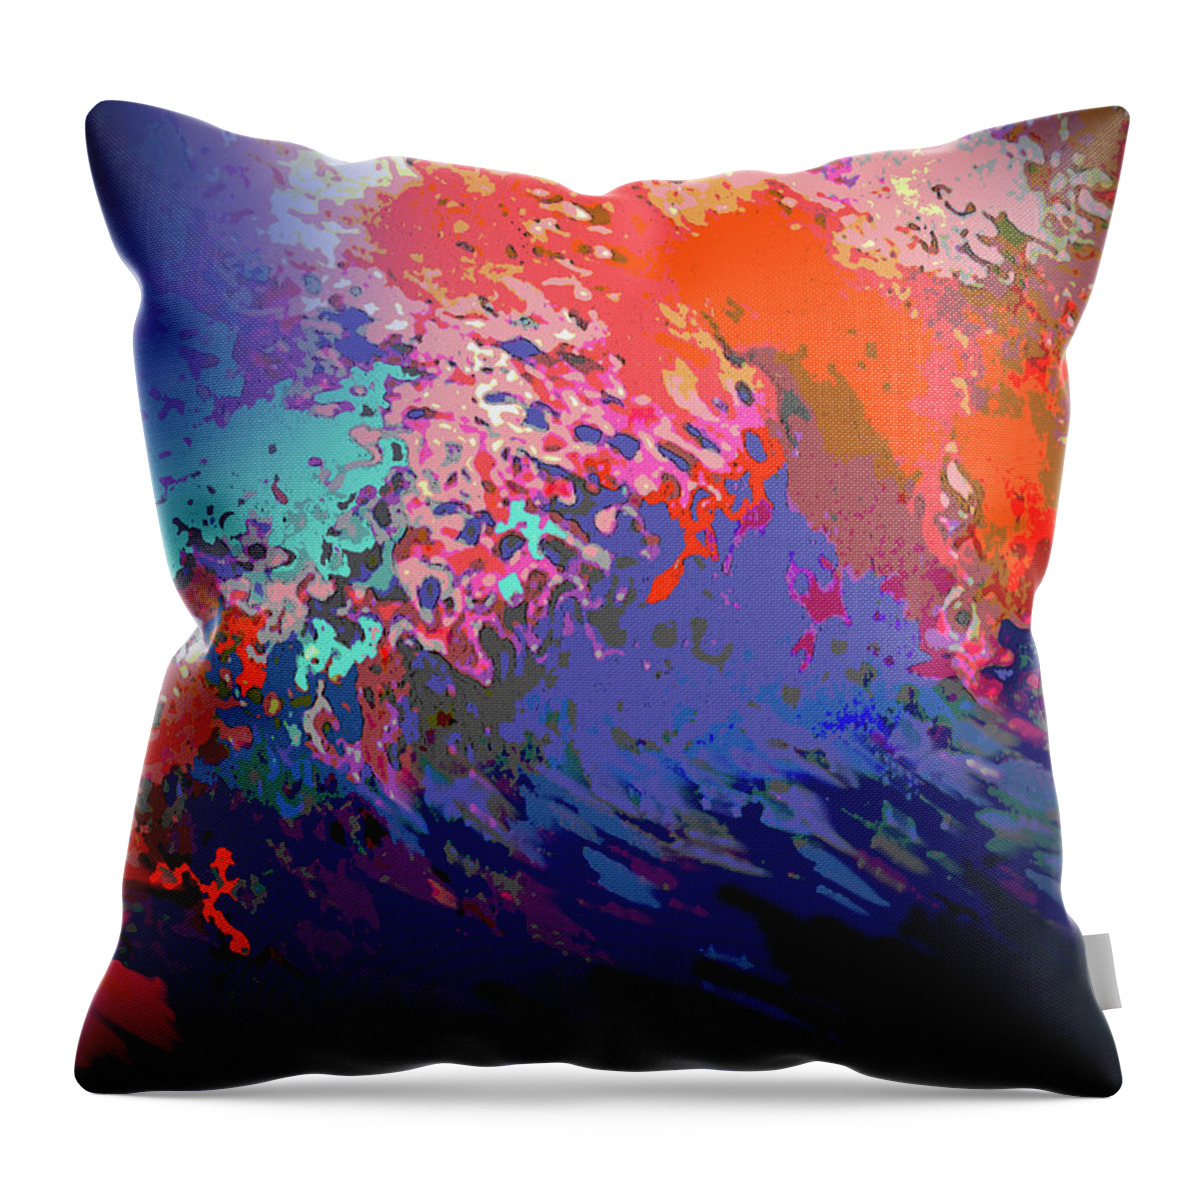 Abstract Throw Pillow featuring the photograph Movement And Color by Ian MacDonald